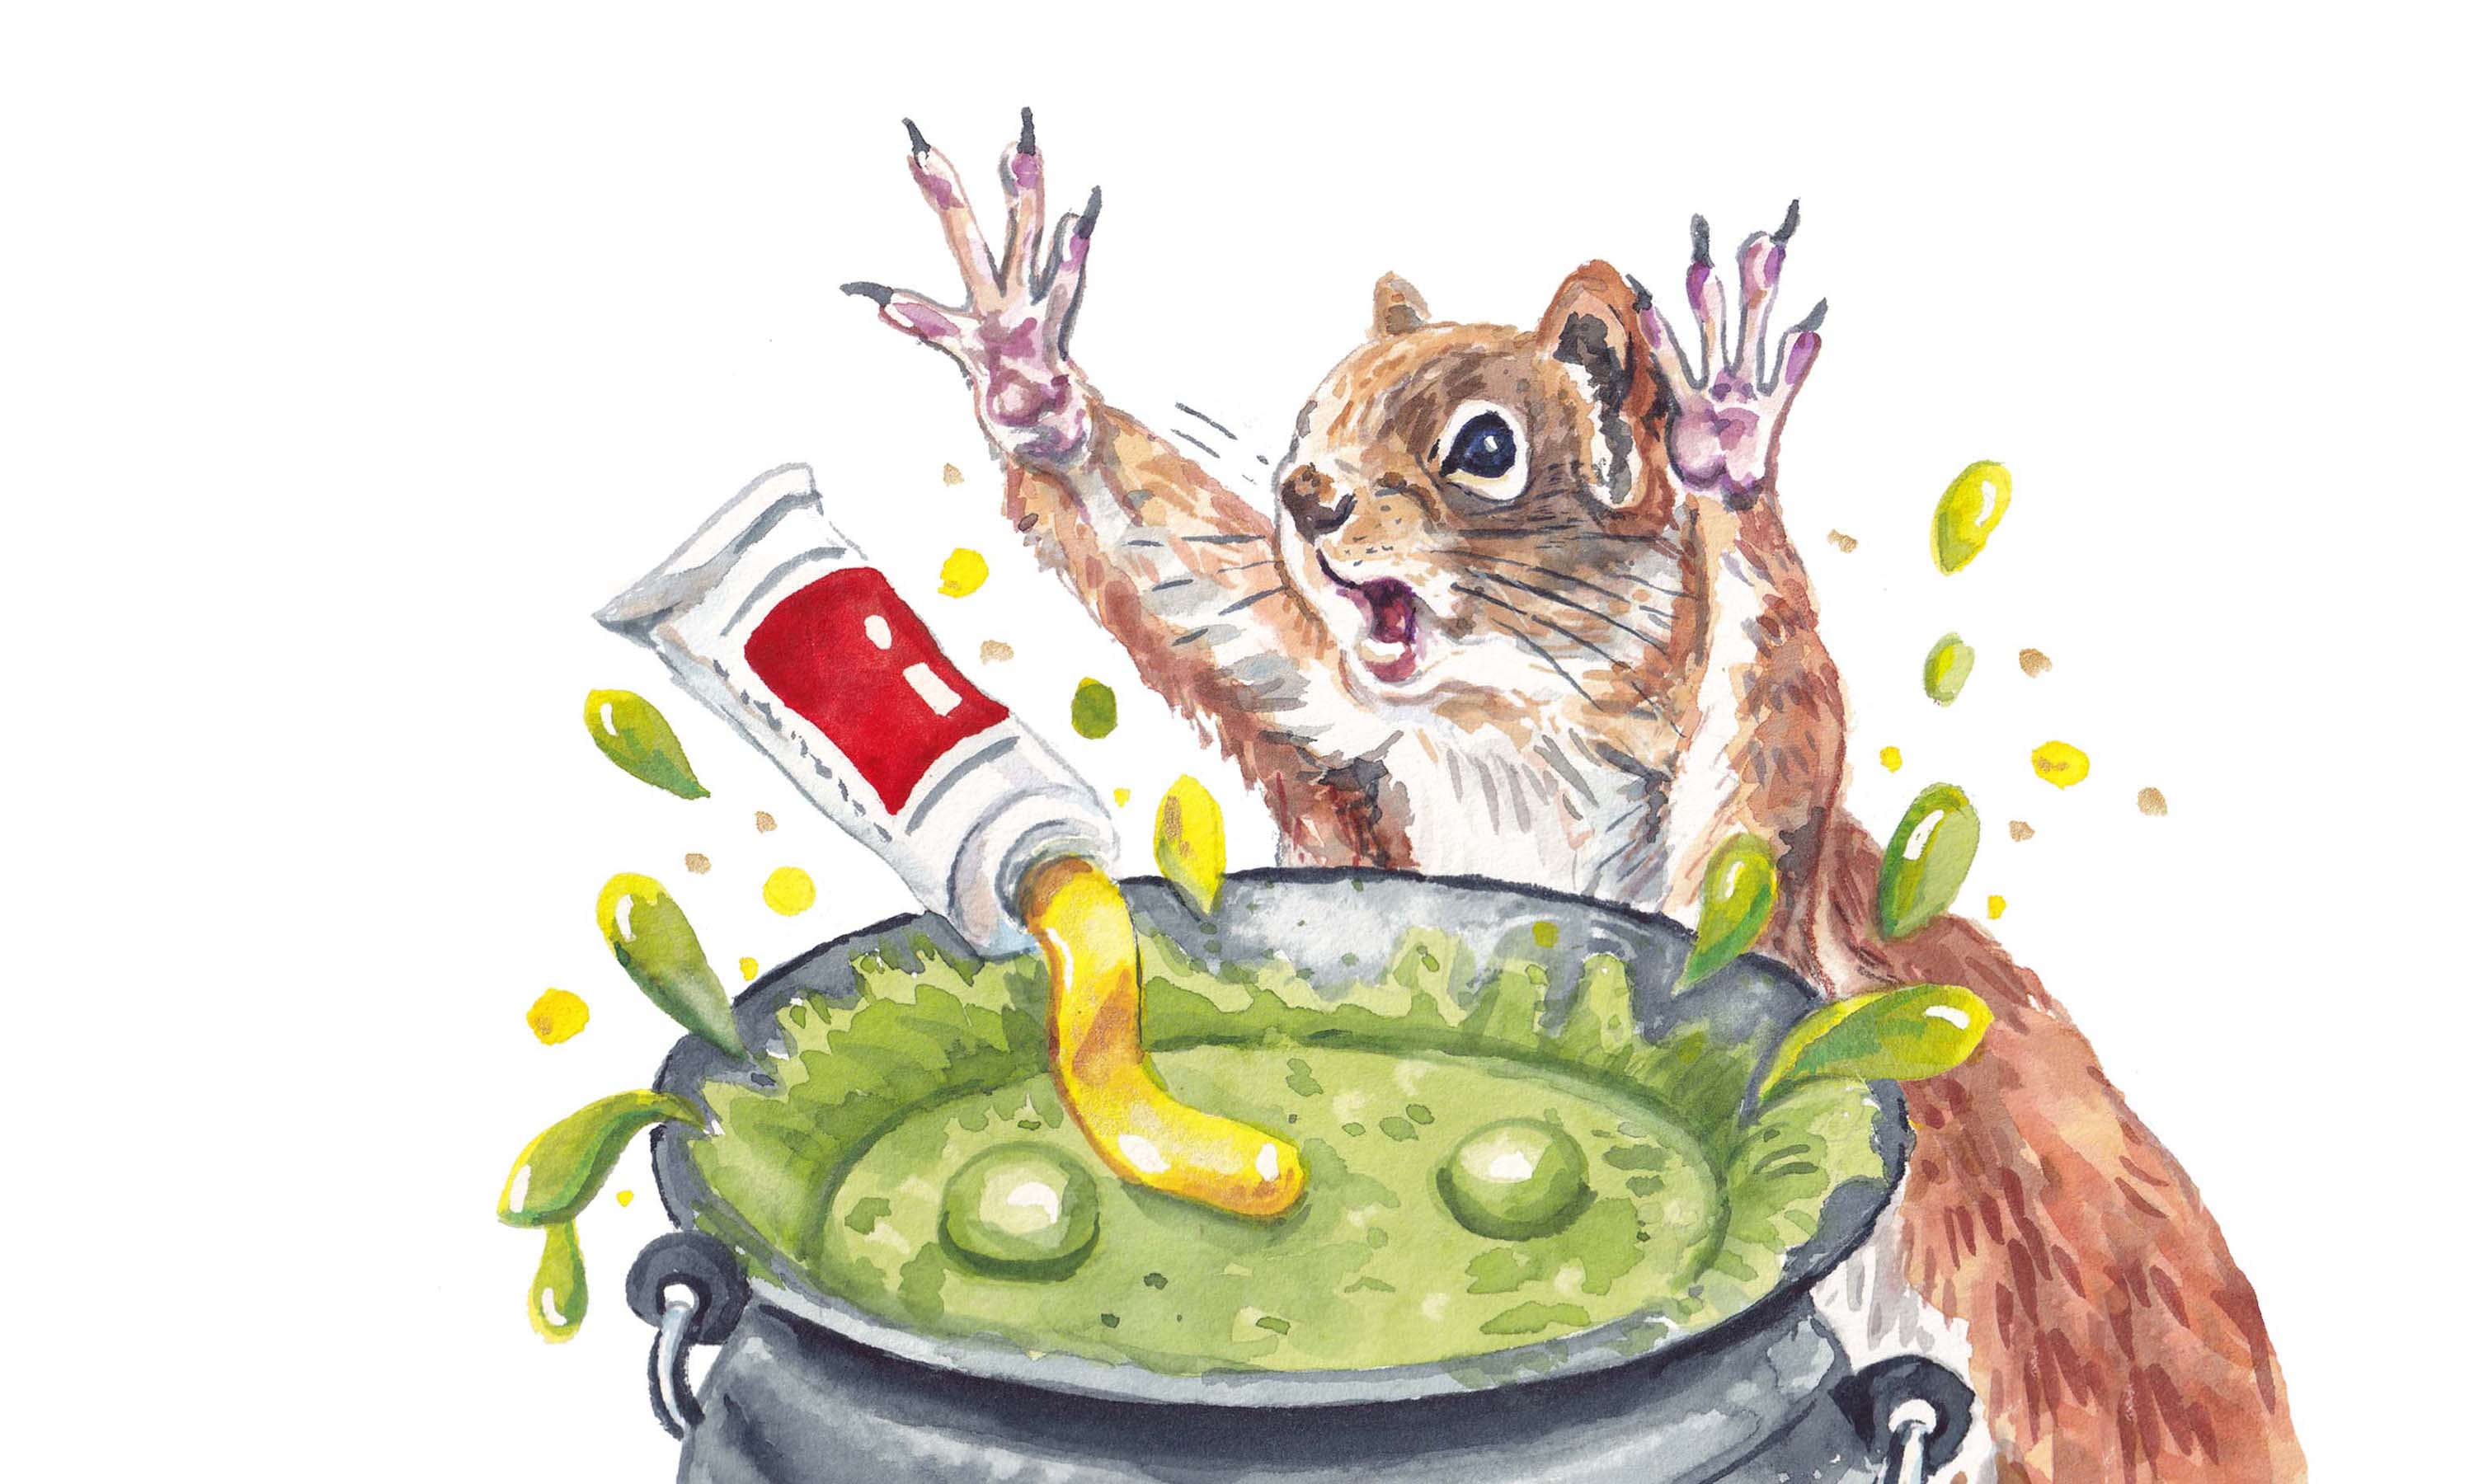 Watercolour painting of a squirrel making magic spells with paint. By Deidre Wicks